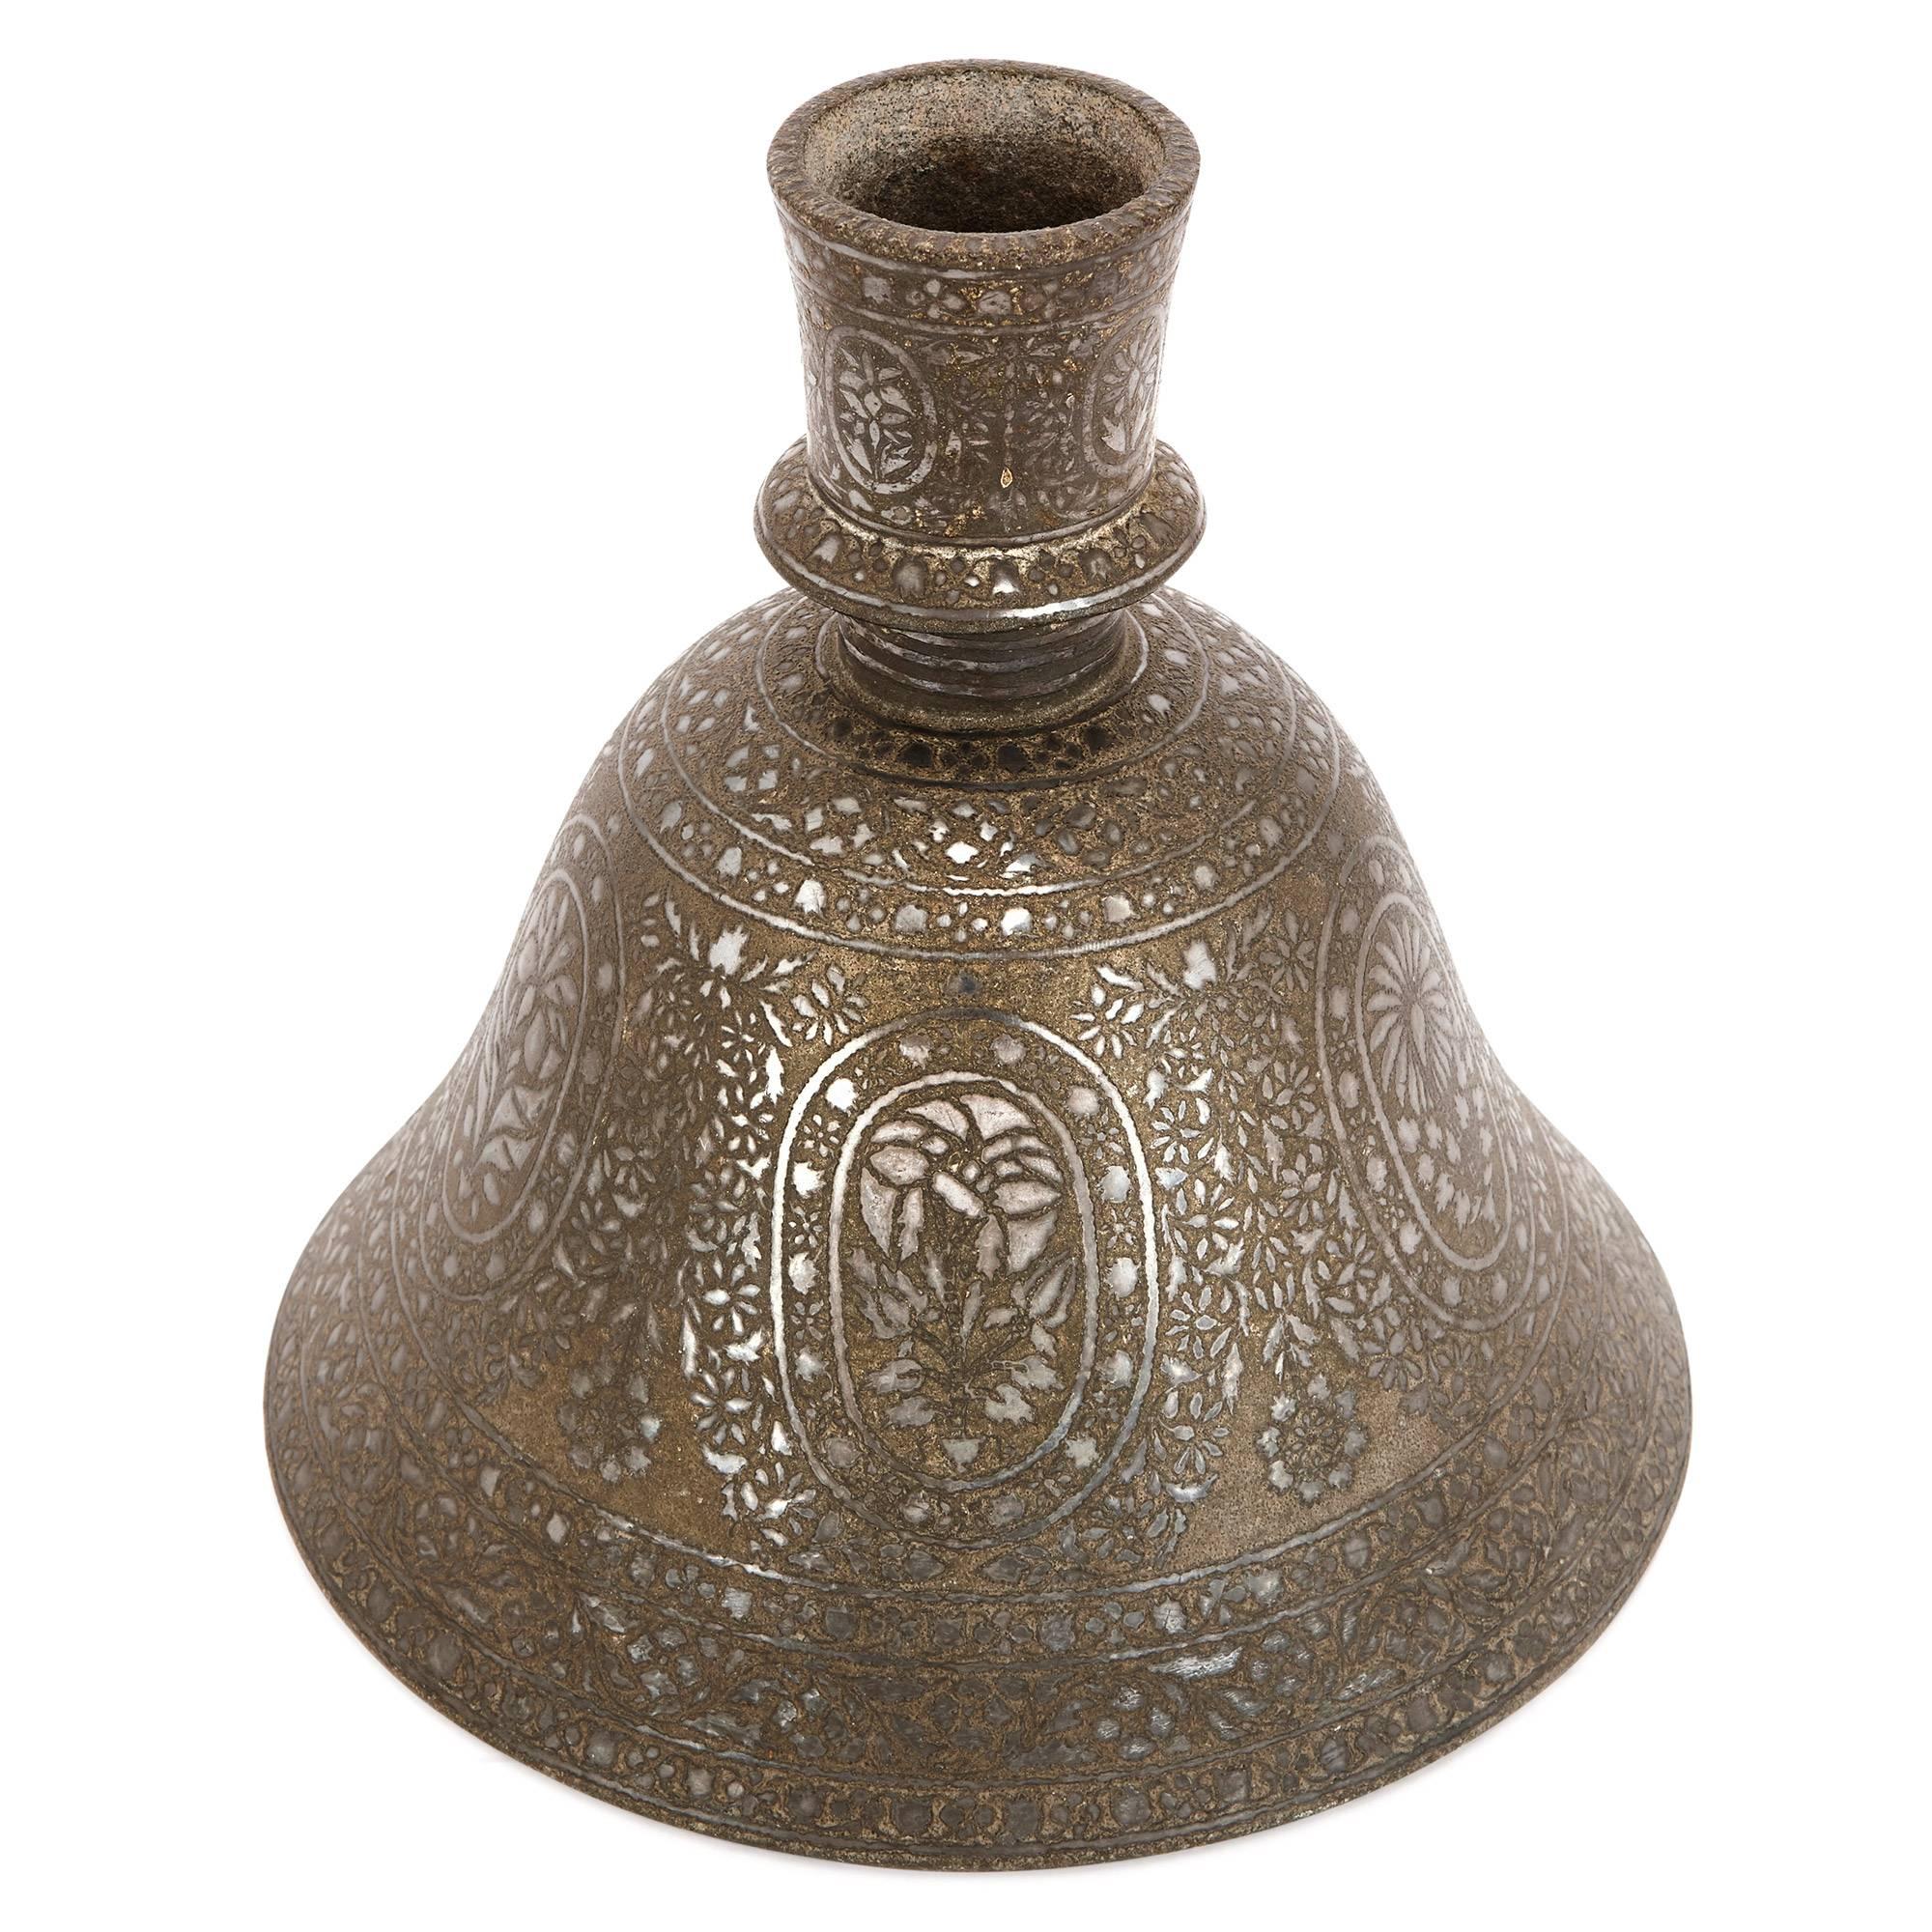 This fascinating piece dates from the 19th century in India, where it was used as a water base for a hookah, or shisha pipe. In traditional hookah smoking, the base of the pipe is normally the most decorative element of the piece. This base is